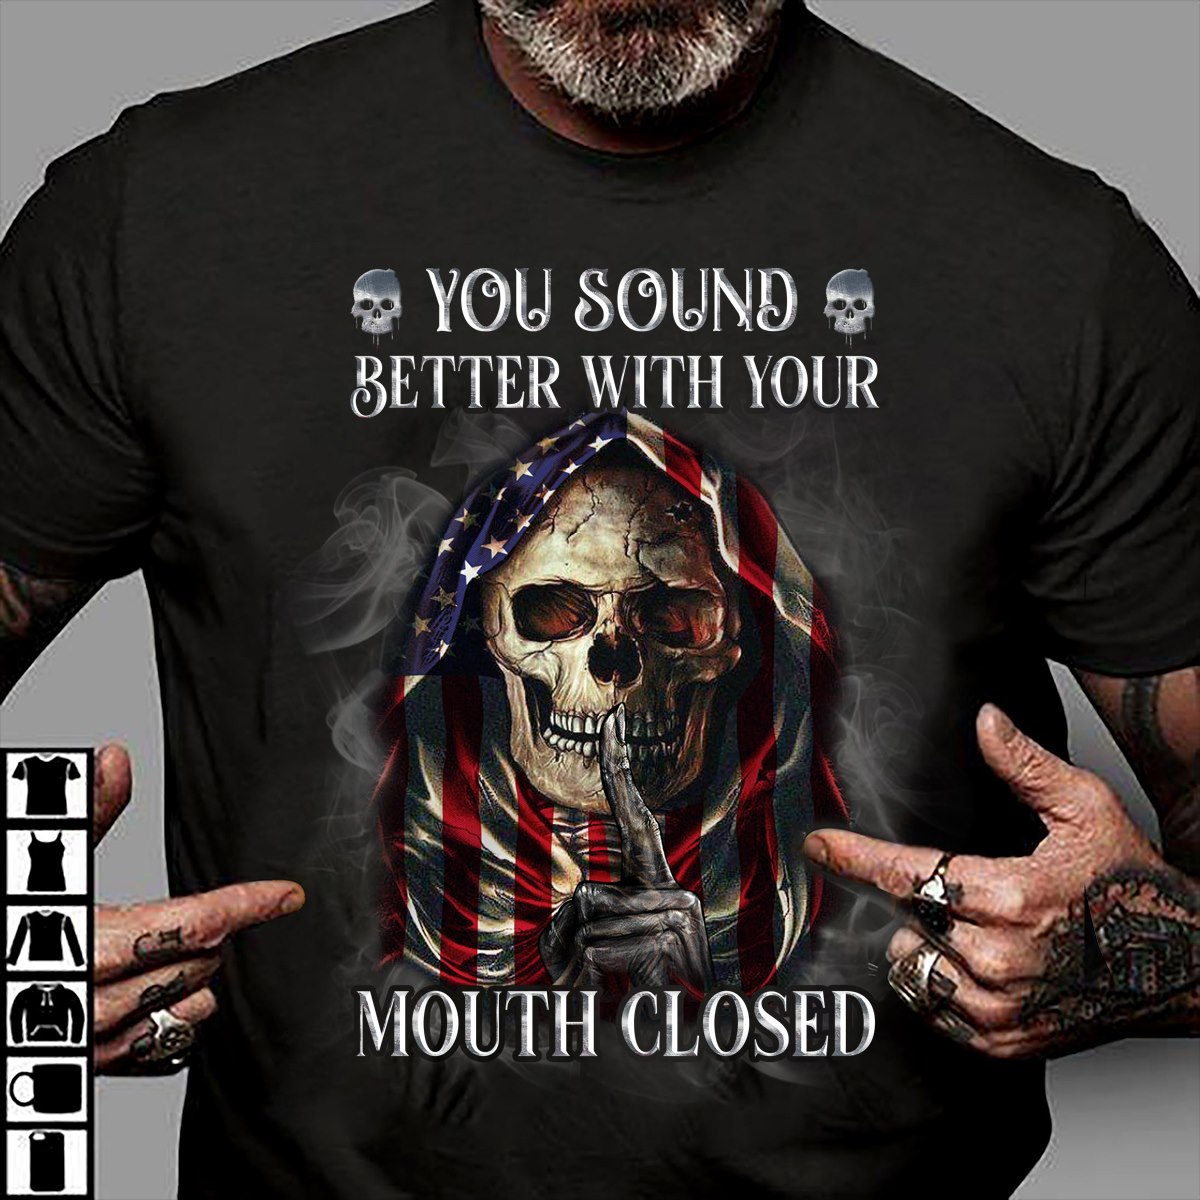 You sound better with your mouth closed - Silence evil, America flag